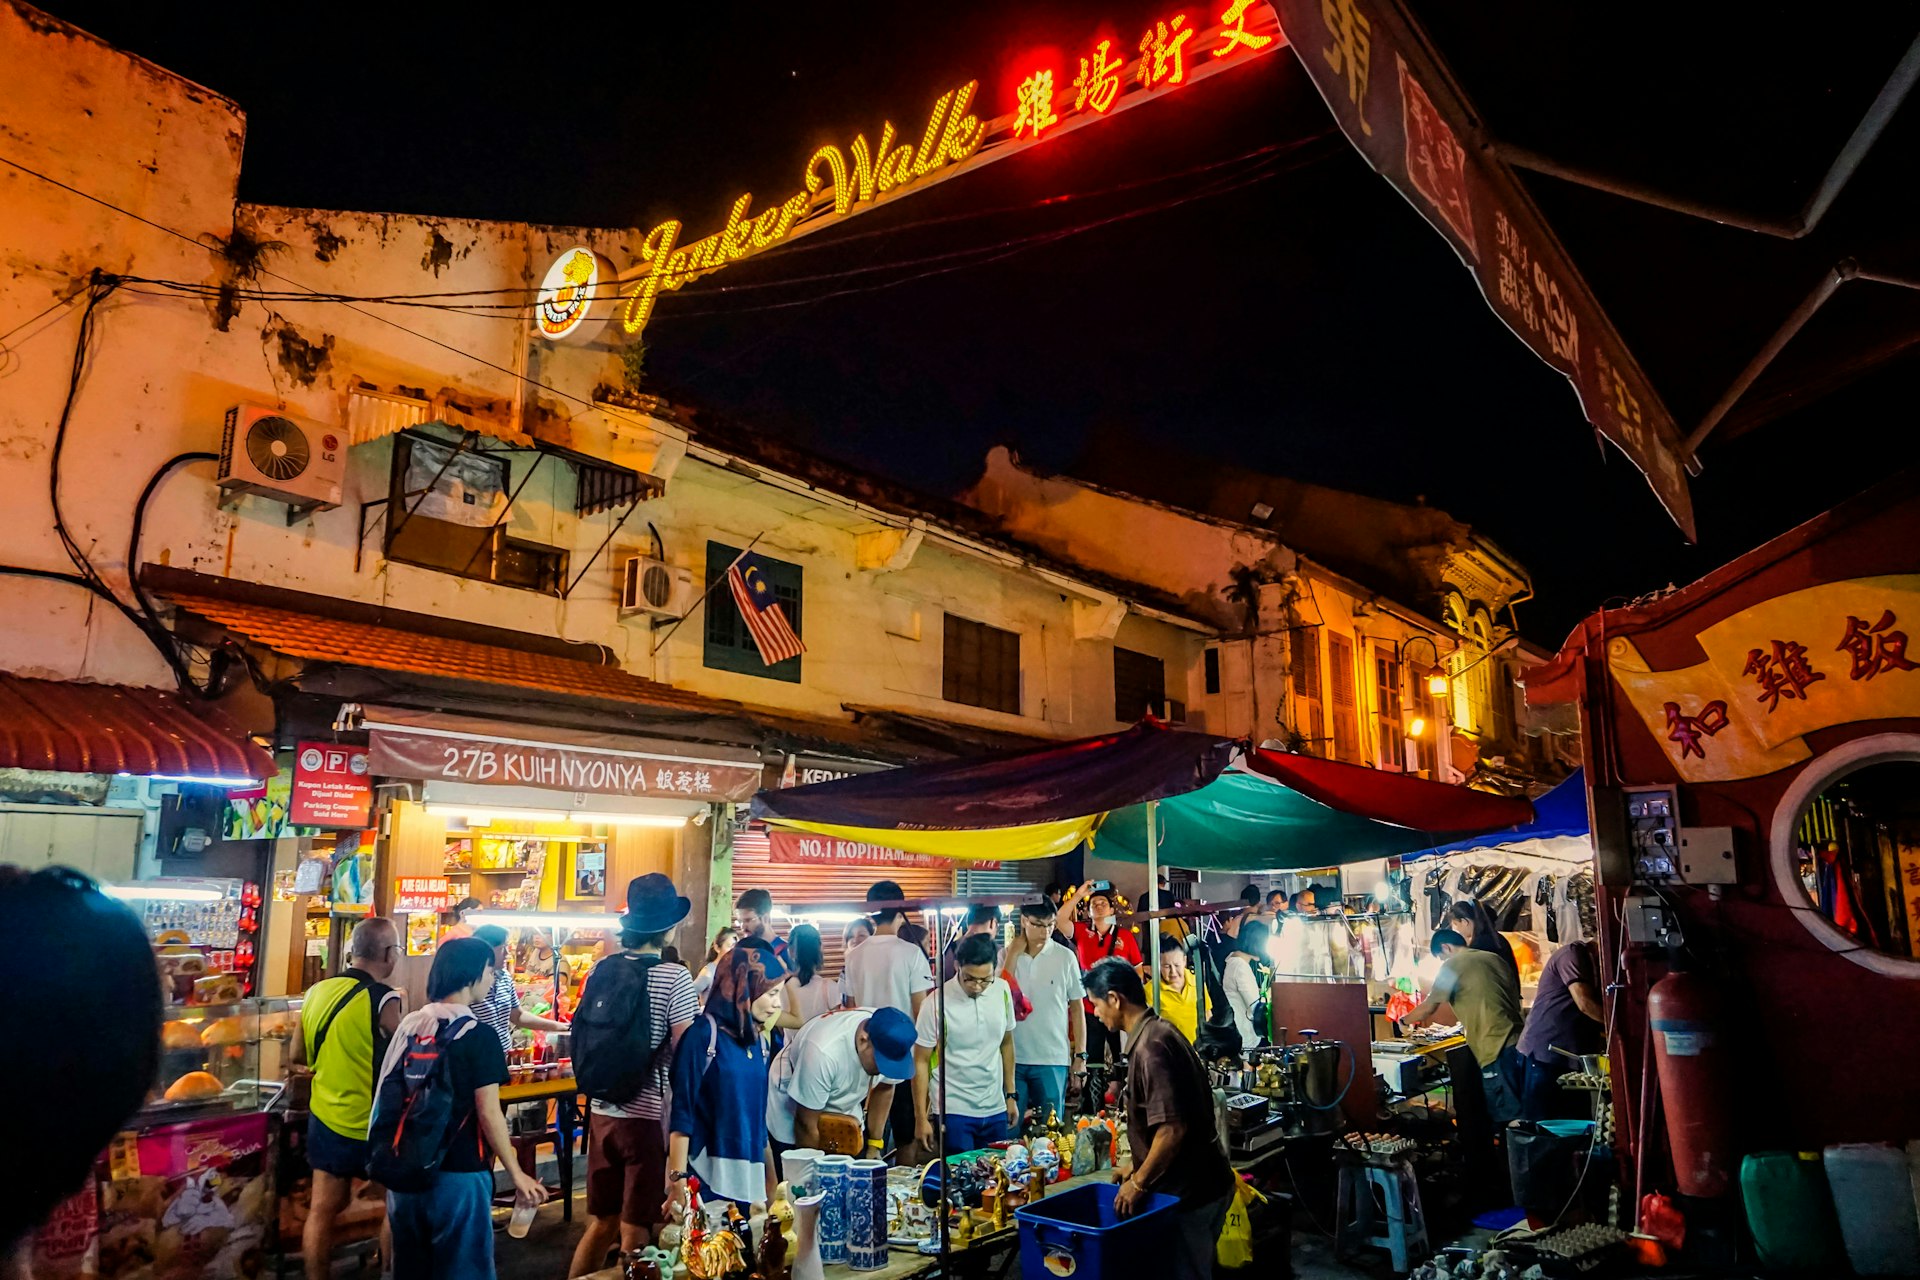 People browse market stalls at night on Jonker Walk in China town.